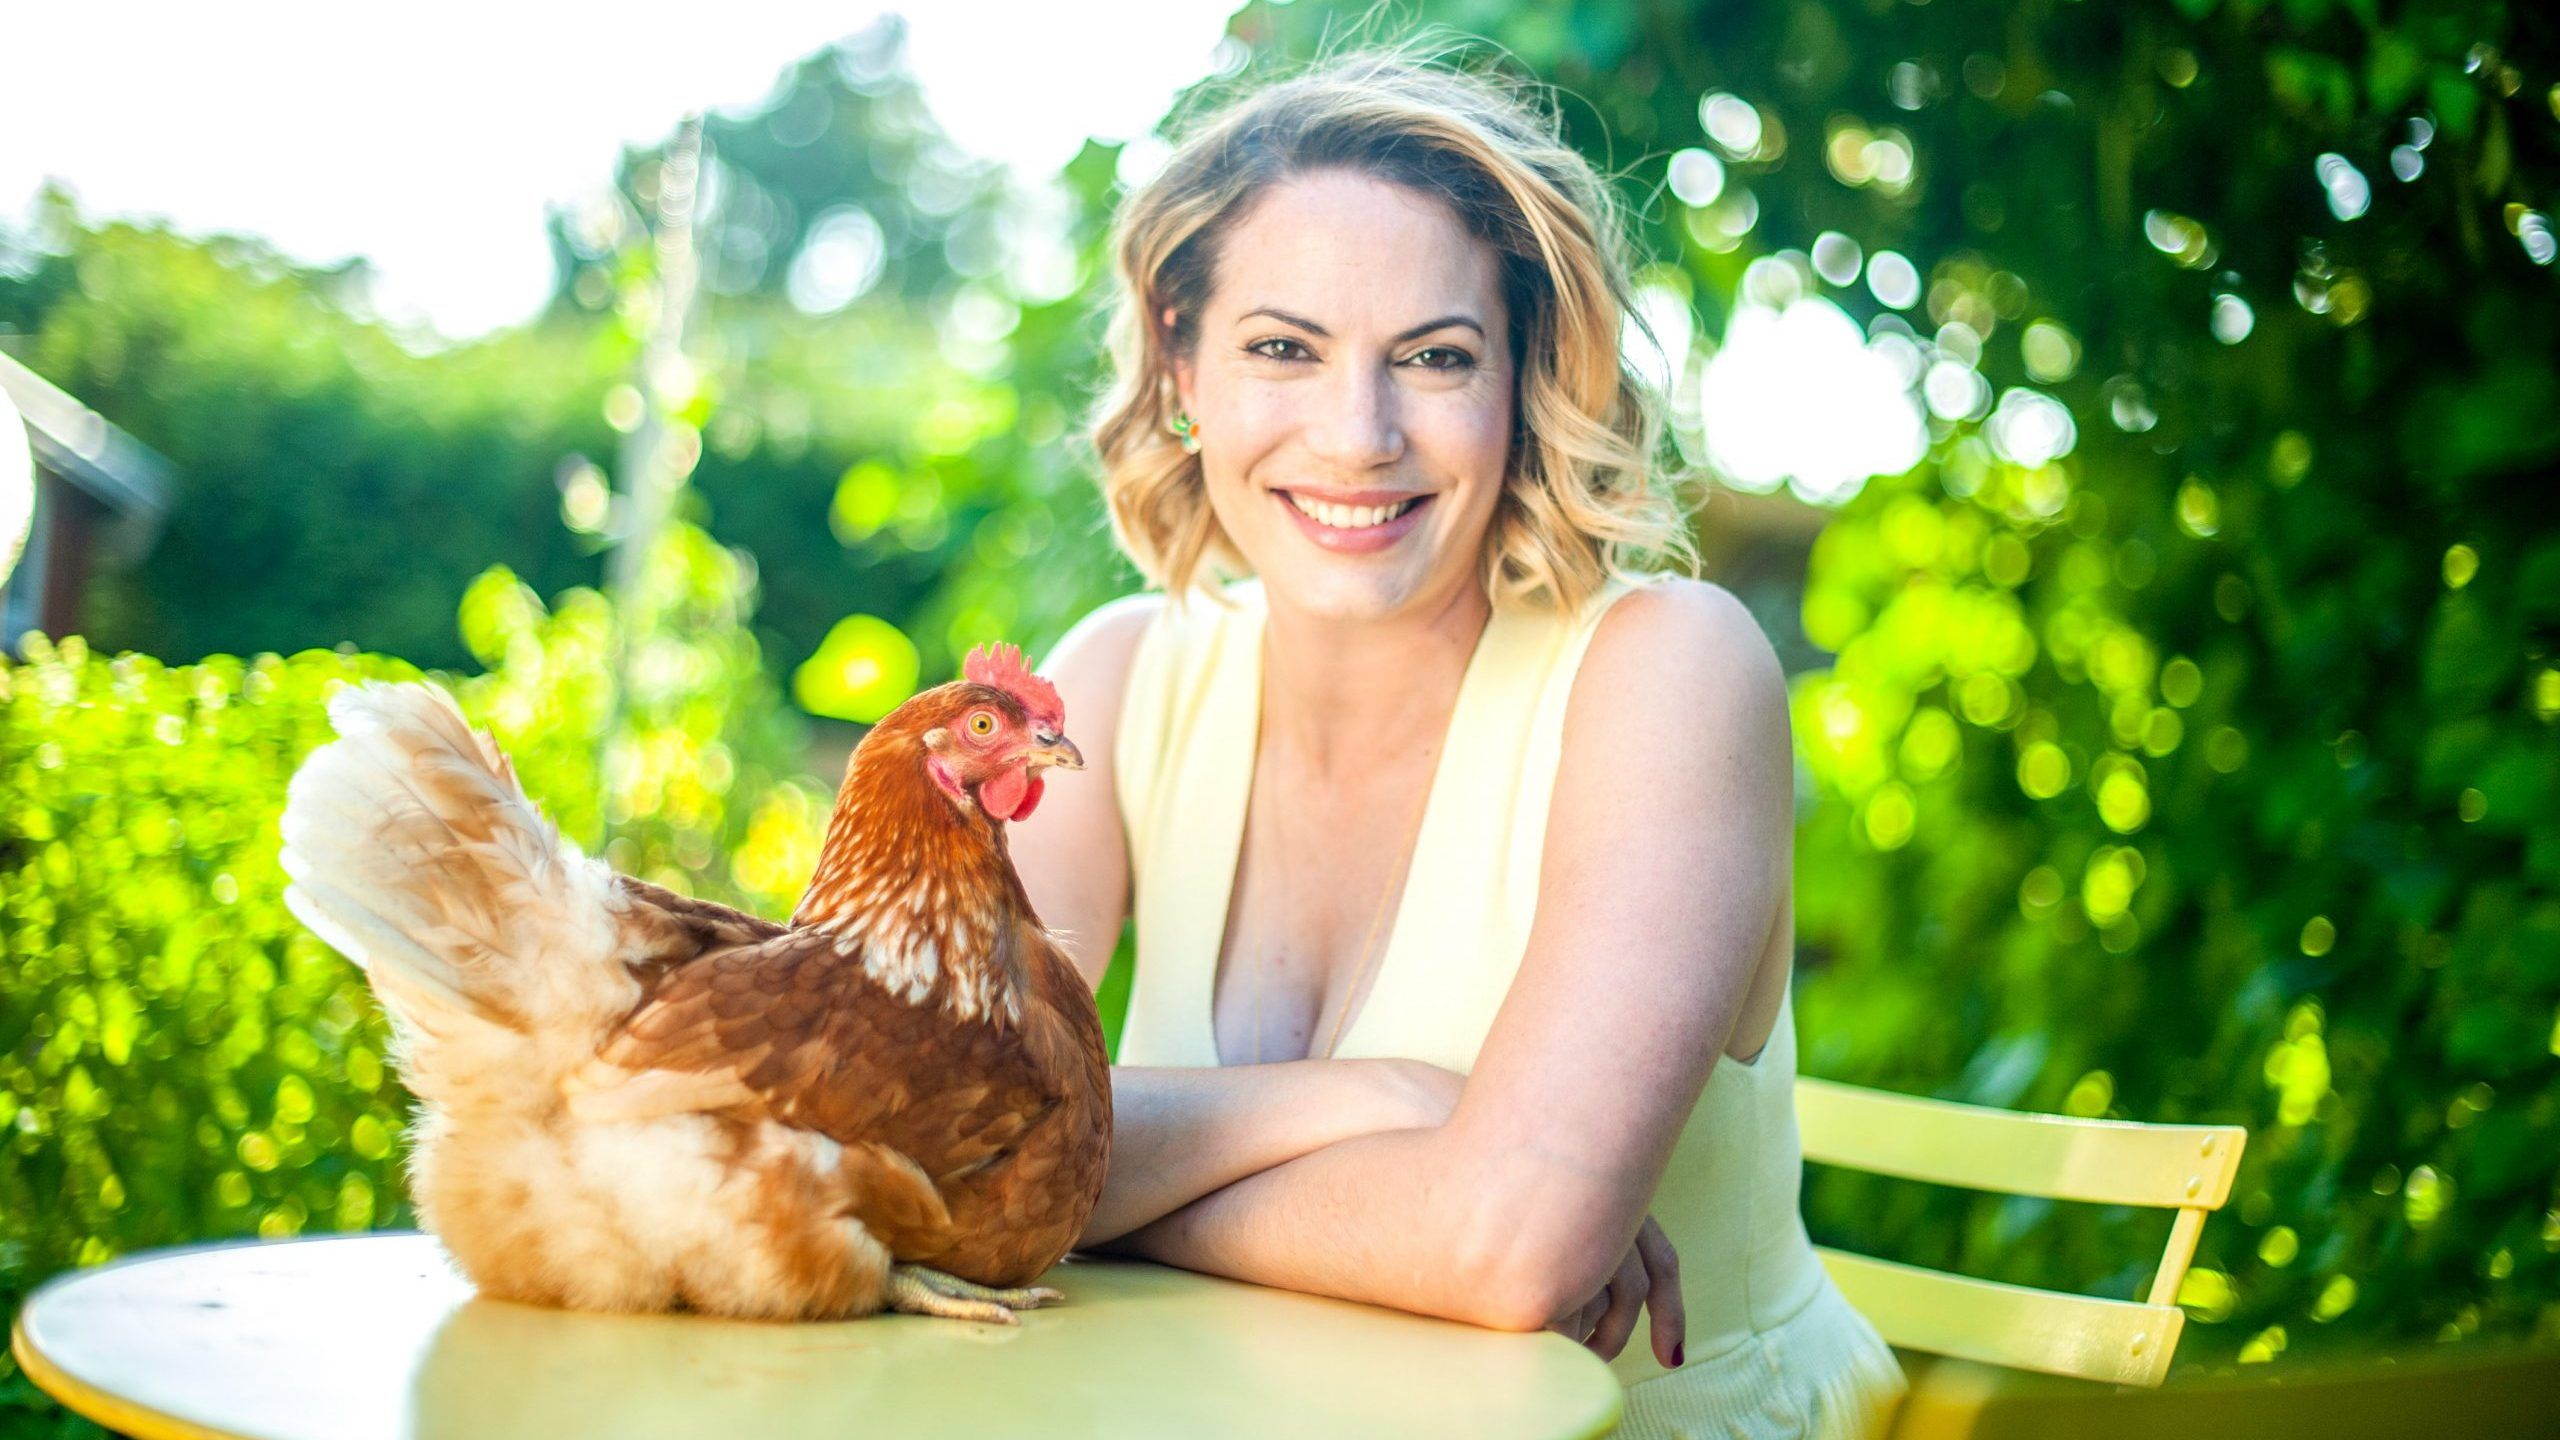 Sandra Grilo started her blog, Chickens in the Six, to answer some common questions about caring for urban chickens. Source: Chickens in the Six